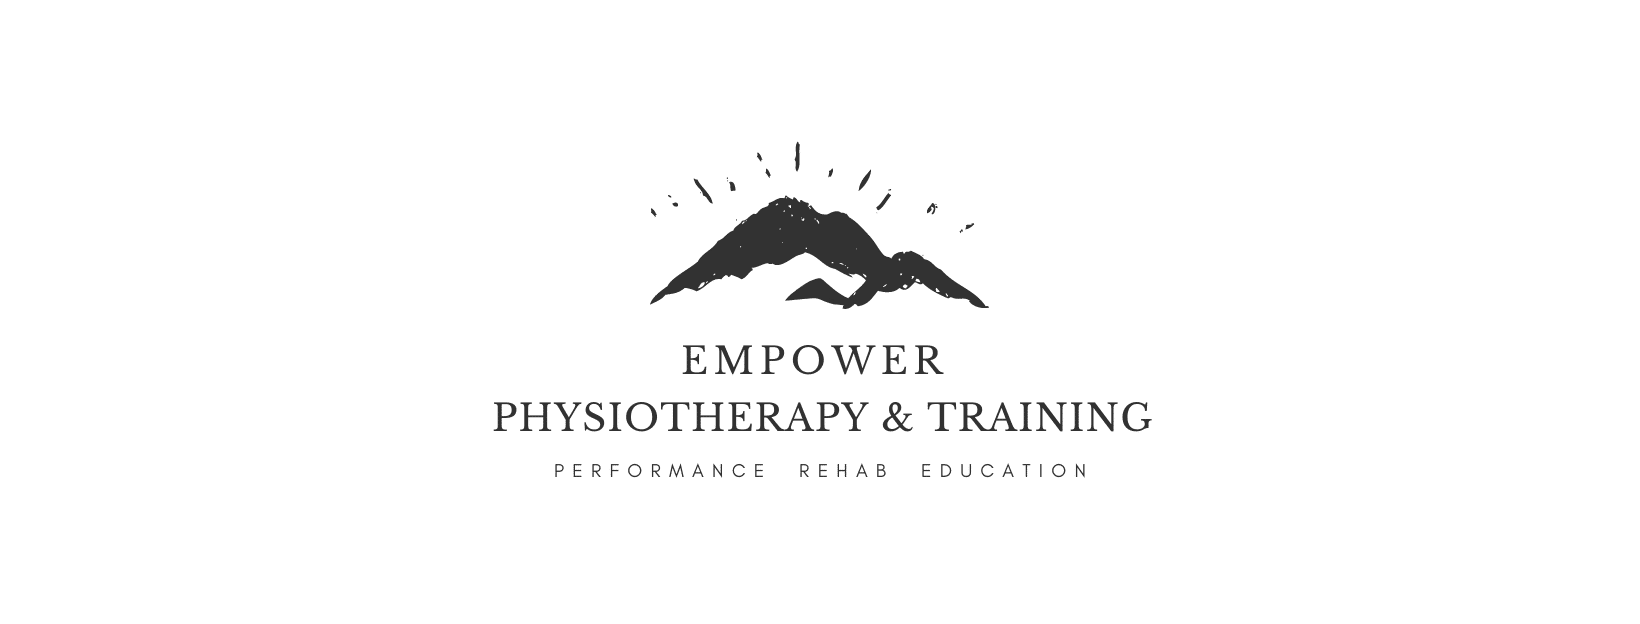 Empower Physiotherapy & Training